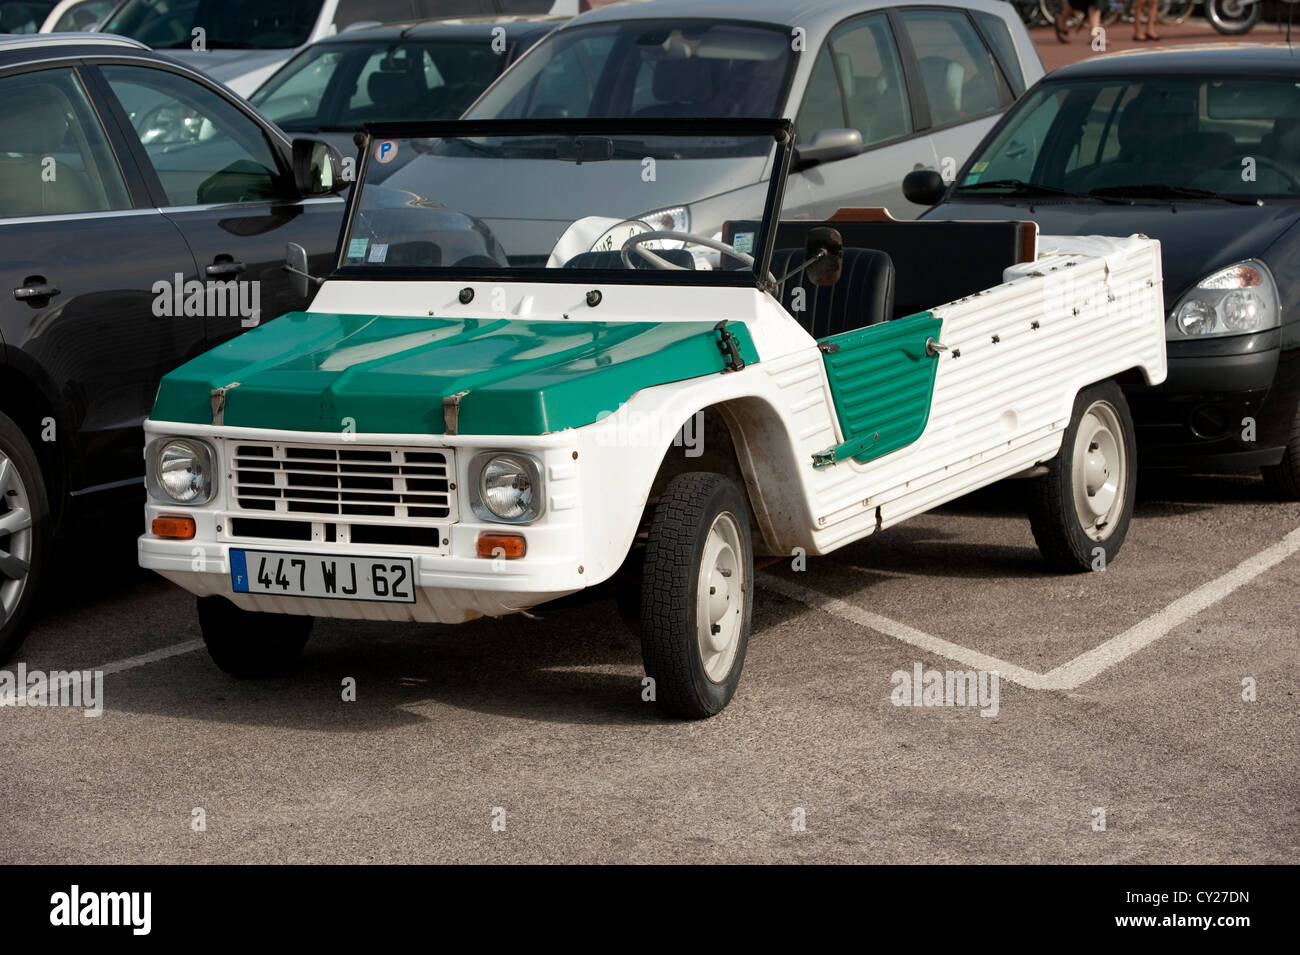 Open Top White and Green buggy truck Le Touquet France Europe Stock Photo